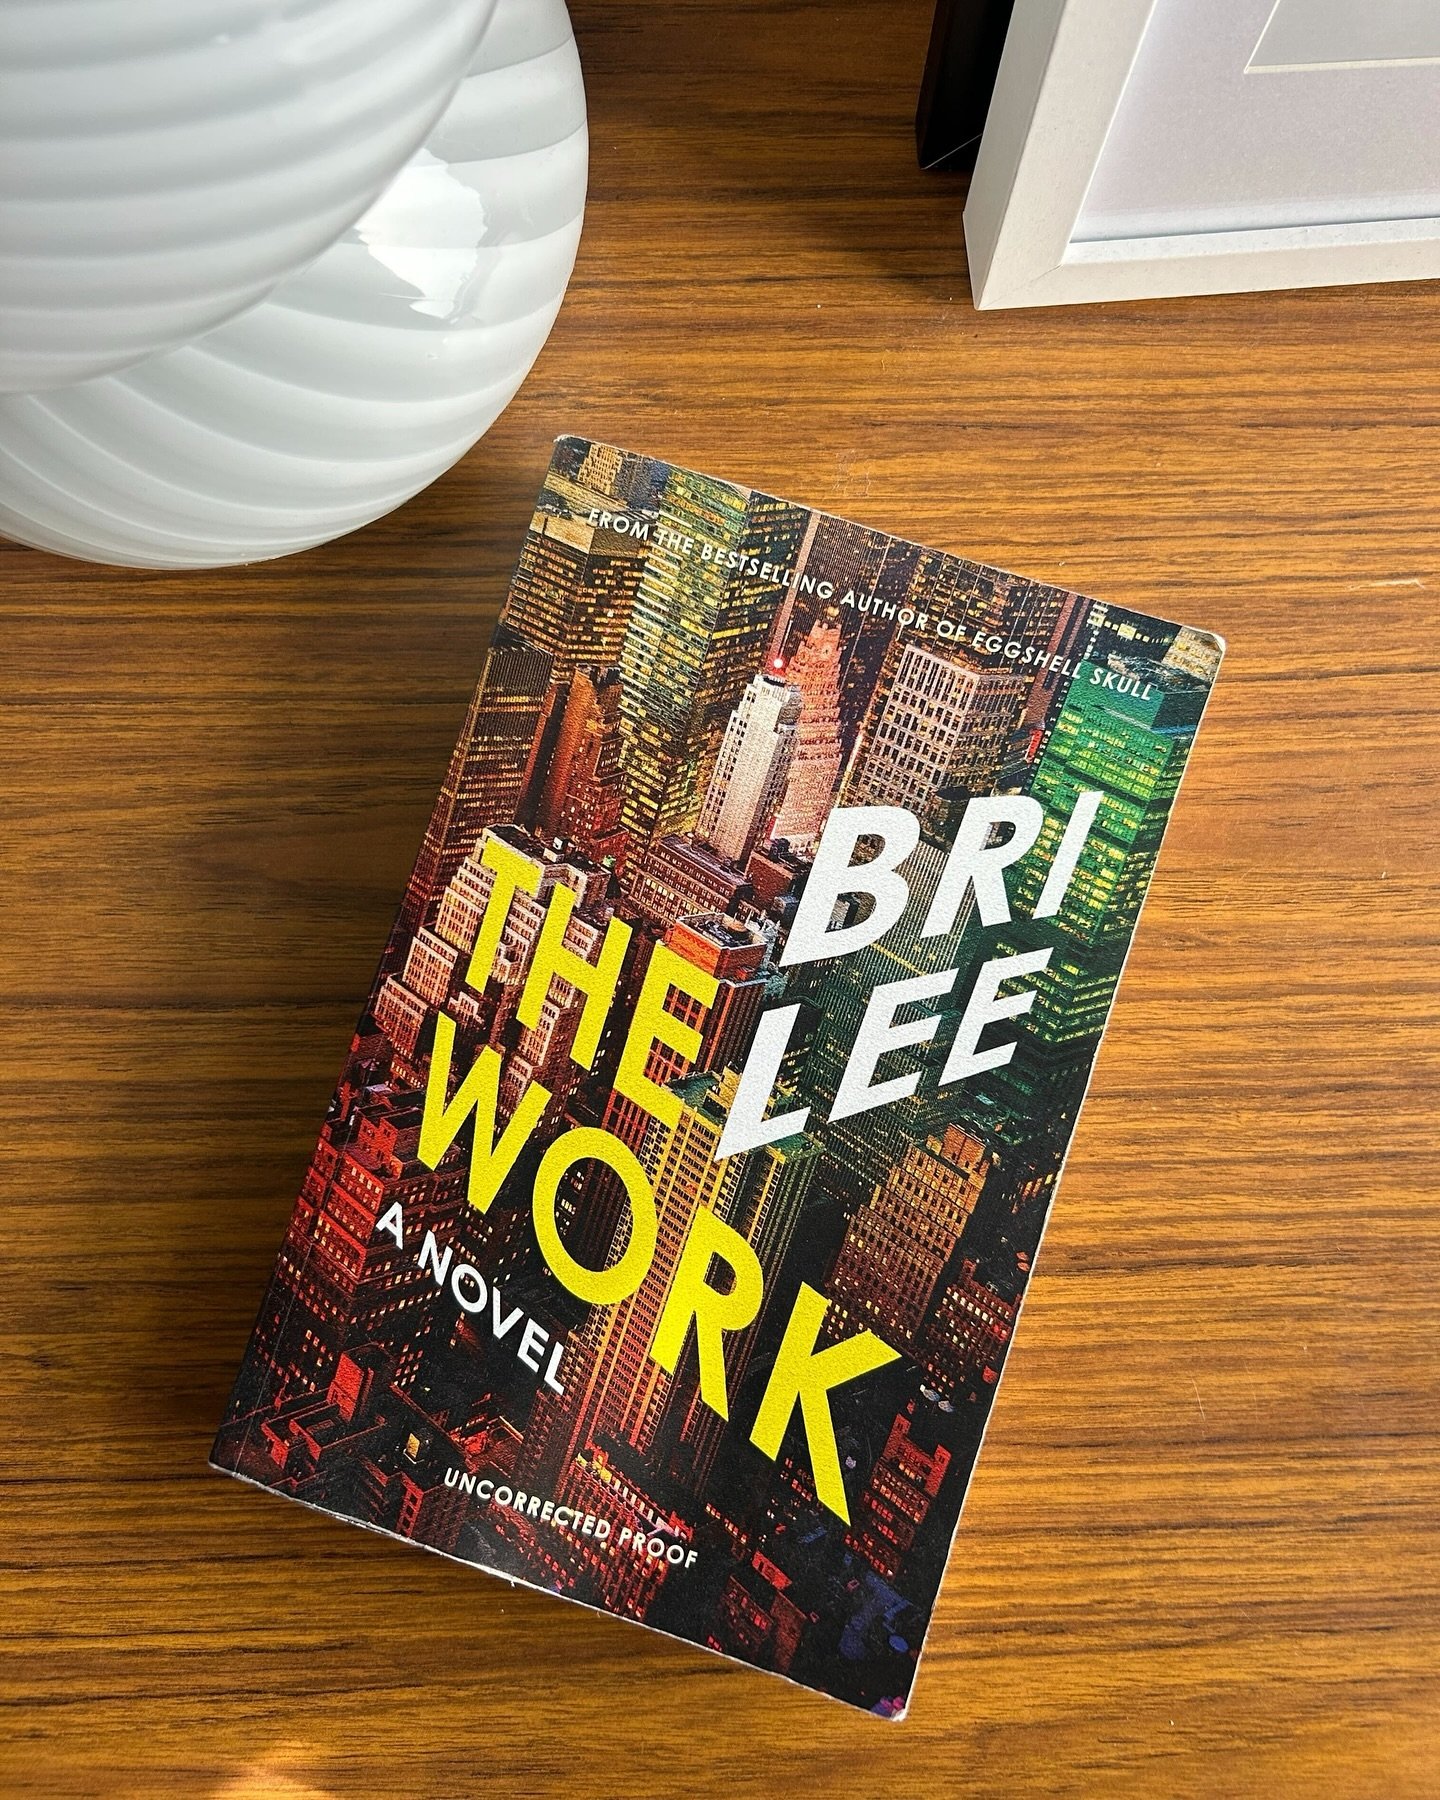 In celebration of Culture Club guest @bri.e.lee&rsquo;s debut fiction, The Work, we&rsquo;re giving three lucky listeners a copy of the book!

All you have to do is:
1. Follow @cultureclubpod
2. Tag two friends in the comments below

Open to Australi